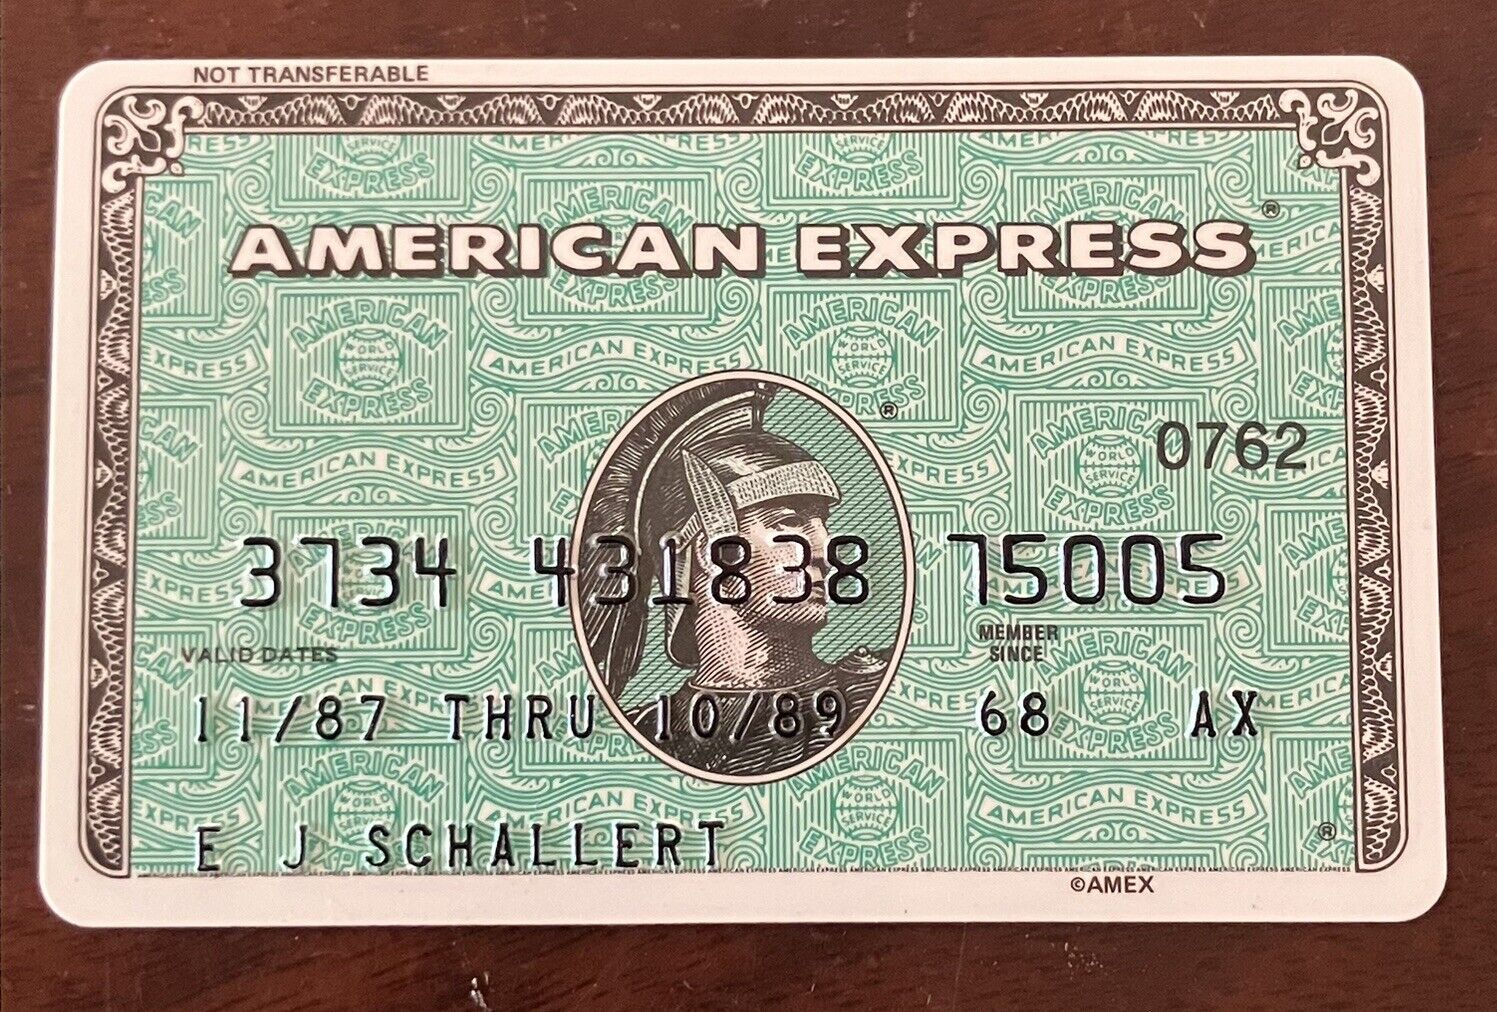 AMERICAN EXPRESS Credit Card green expired in 1987 vintage prop AmEx